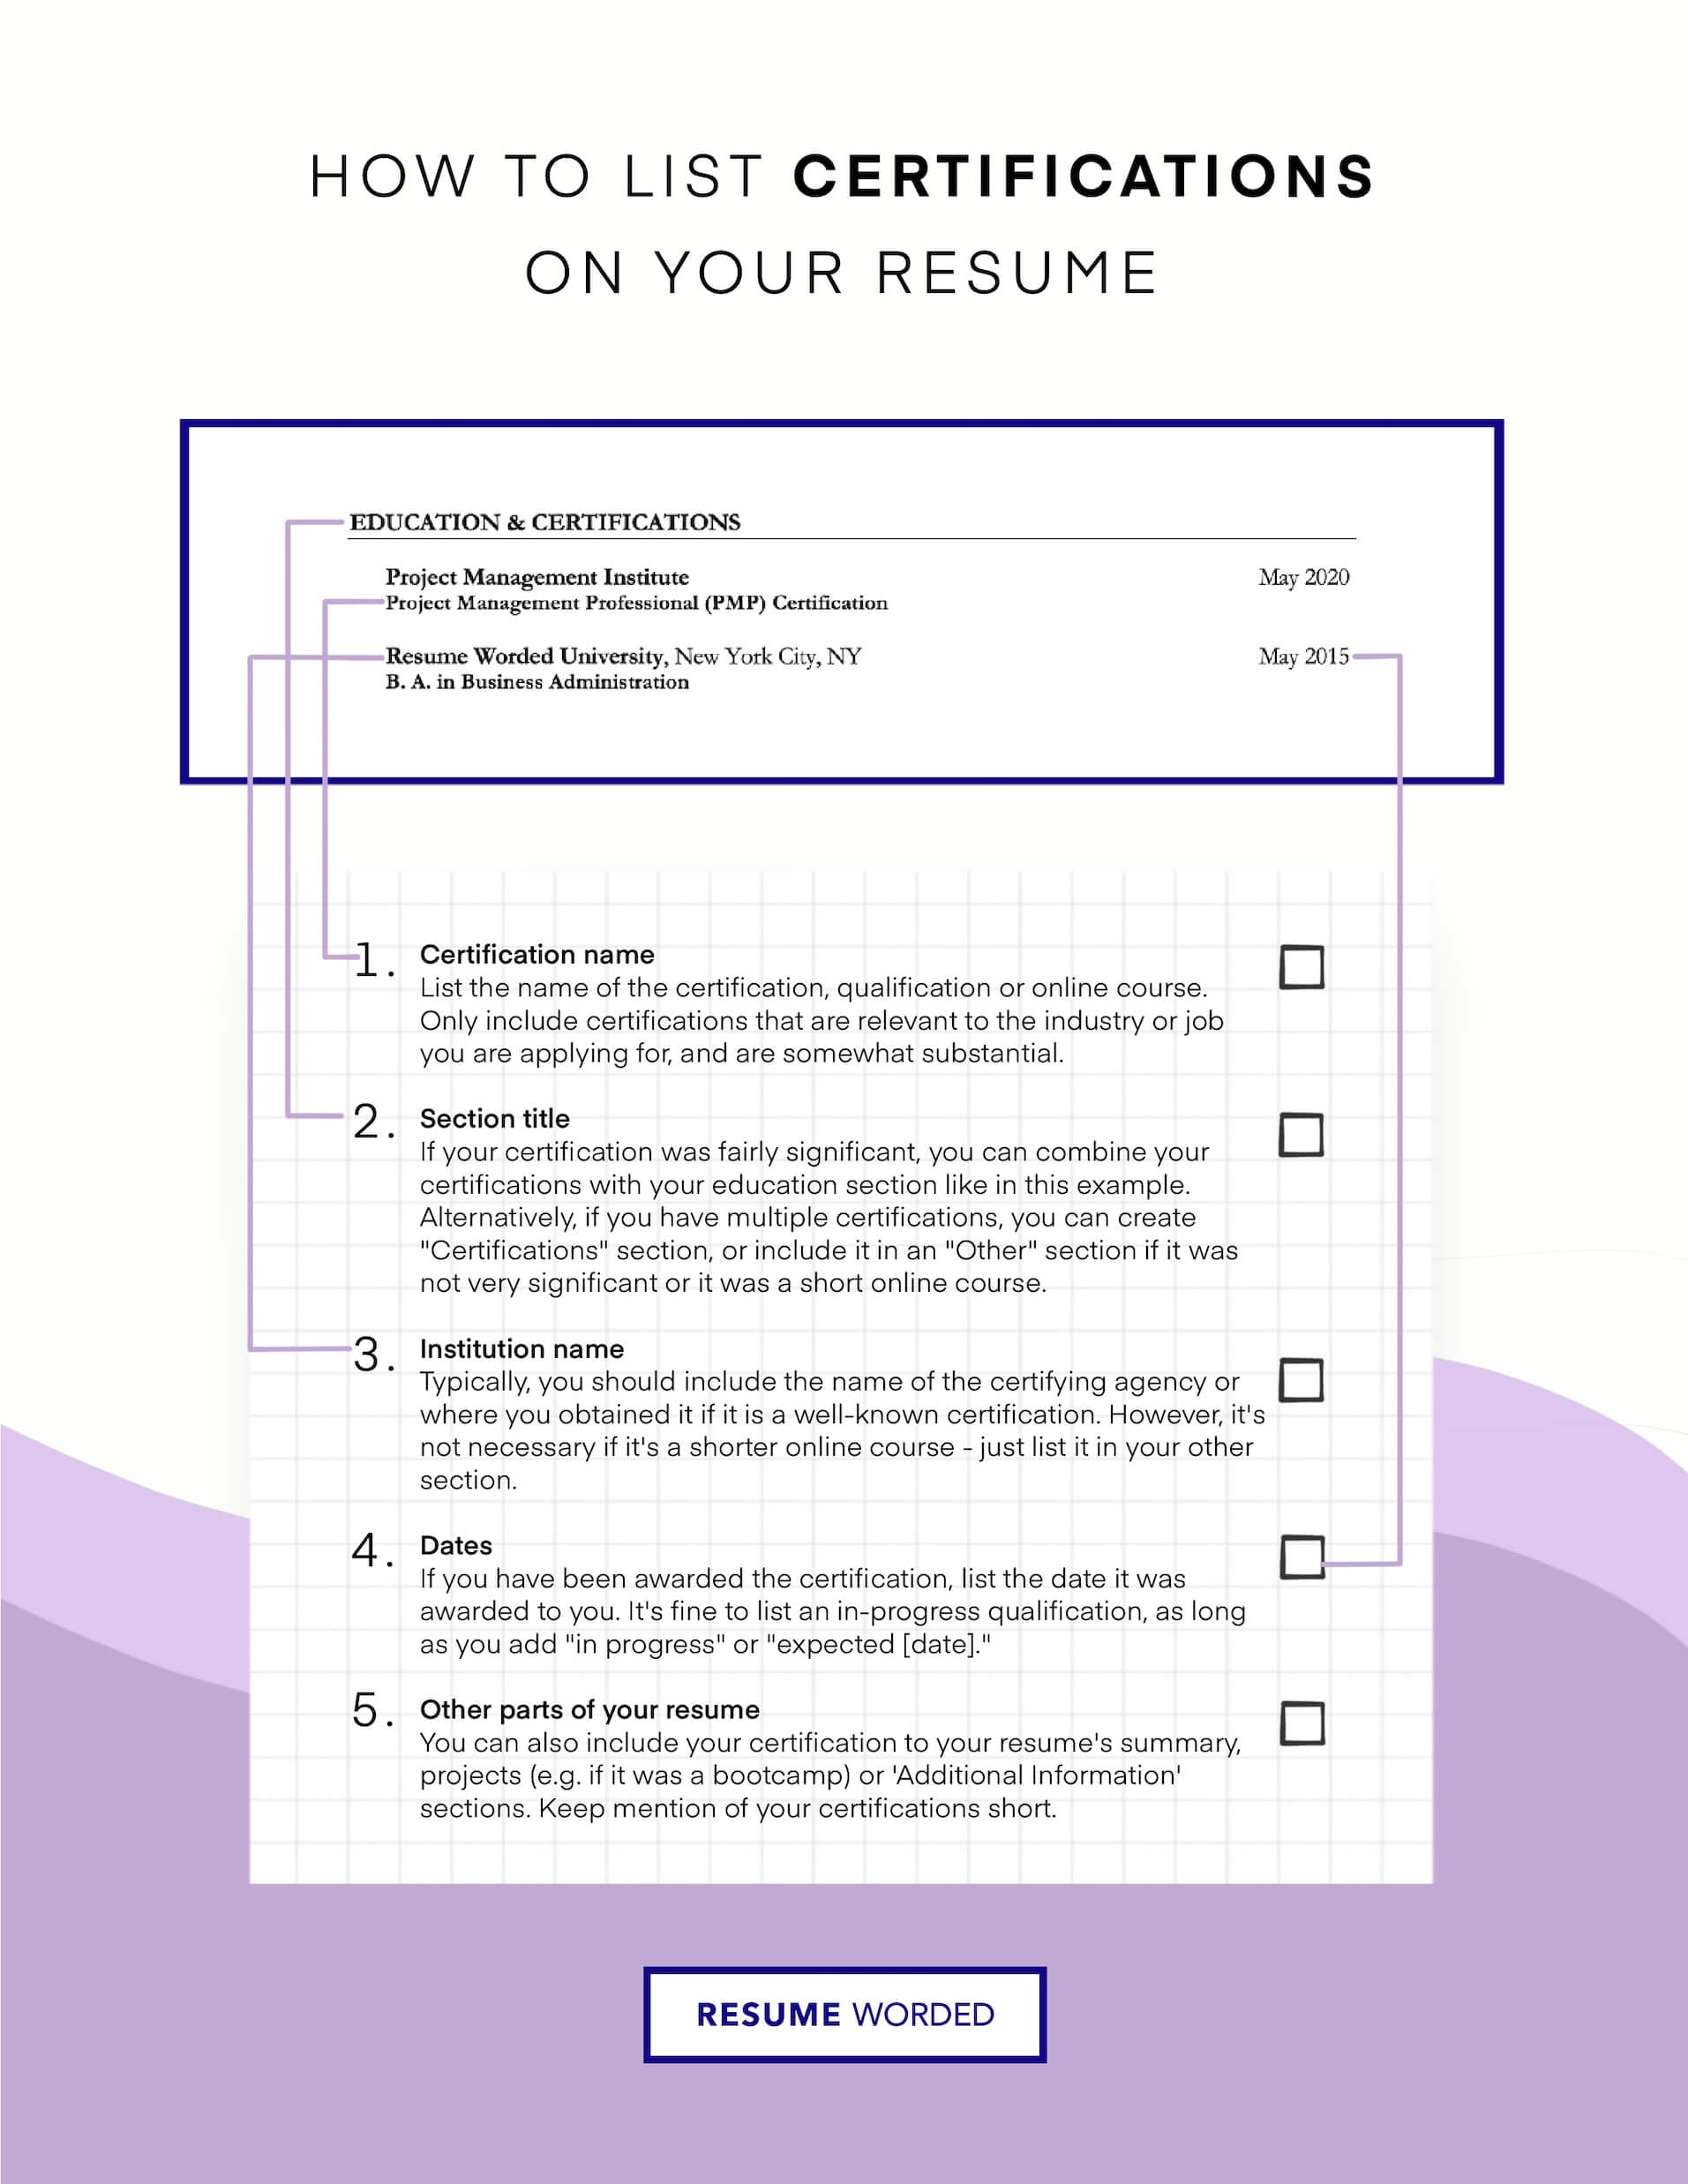 Include relevant licences and certifications - Delivery Driver CV